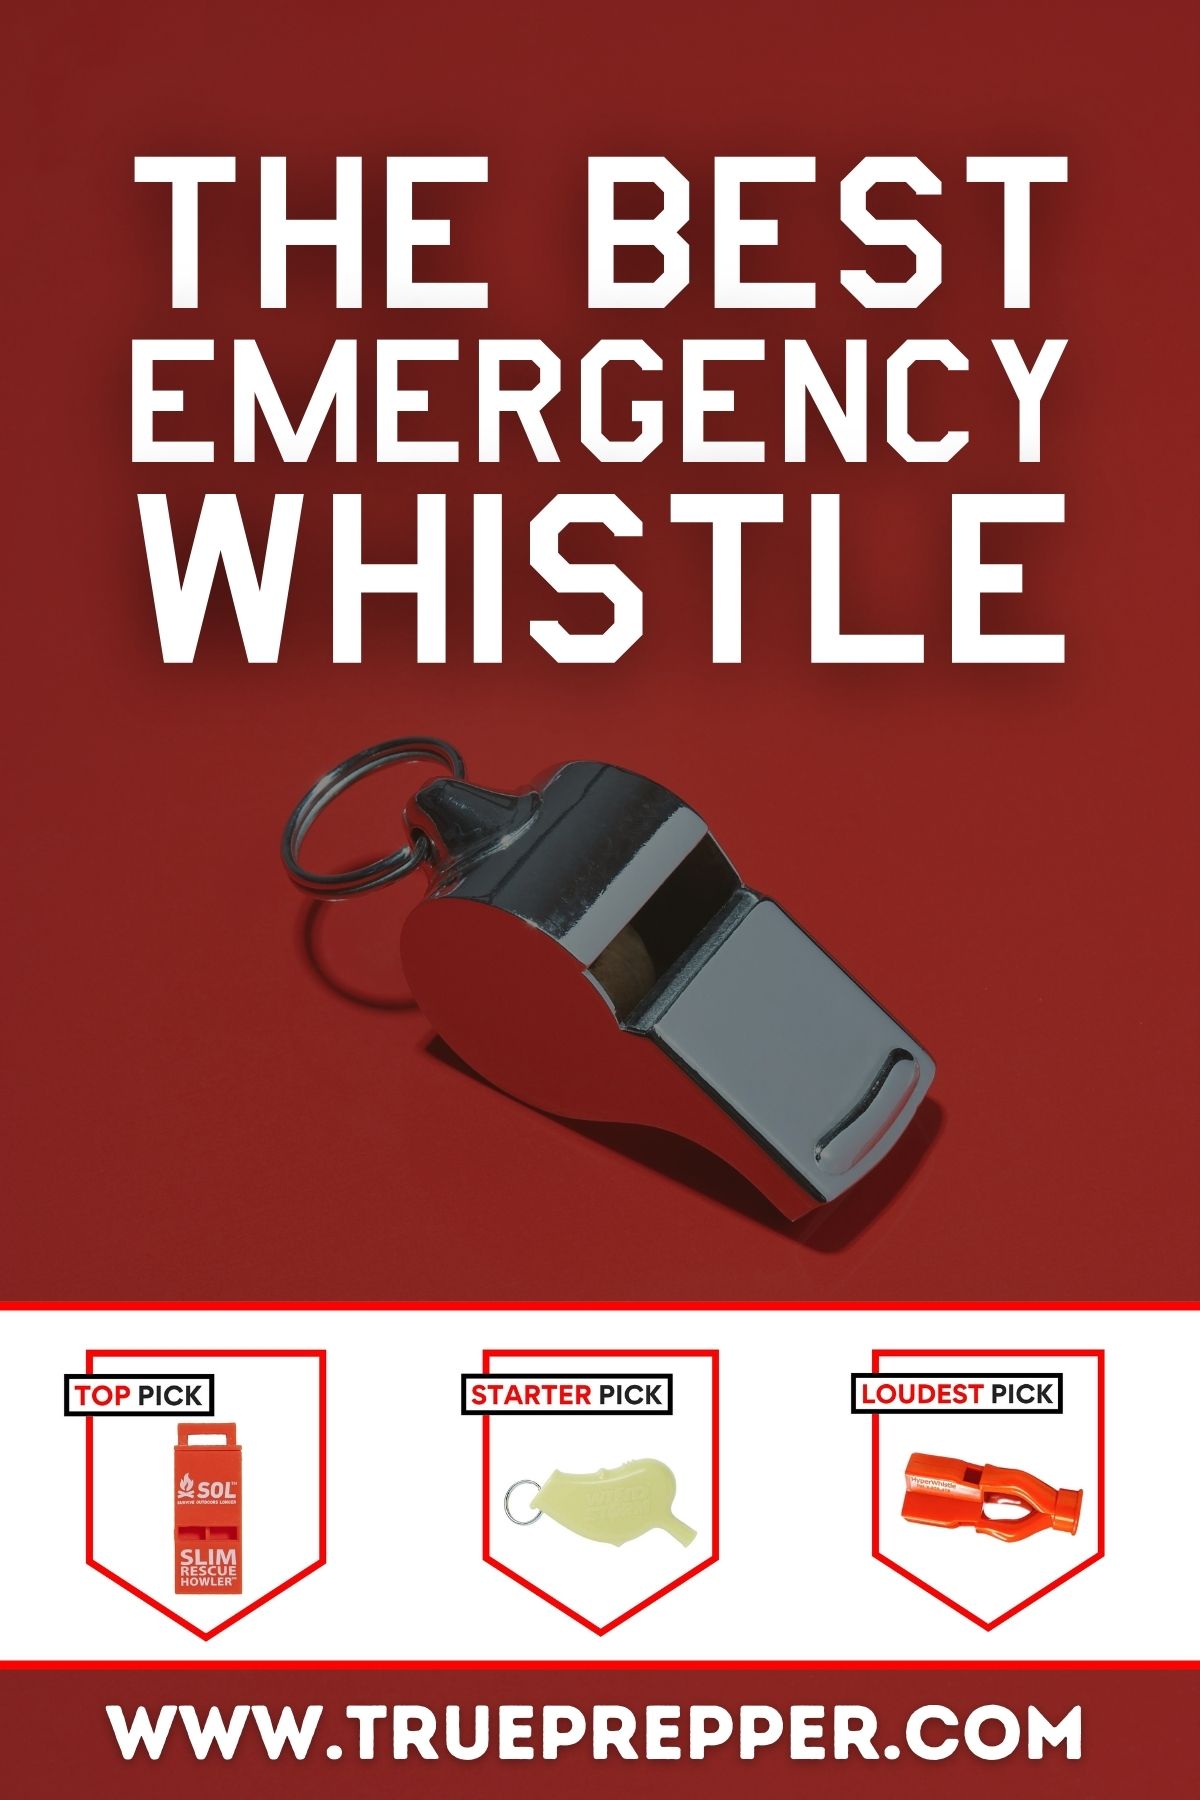 The Best Emergency Whistle